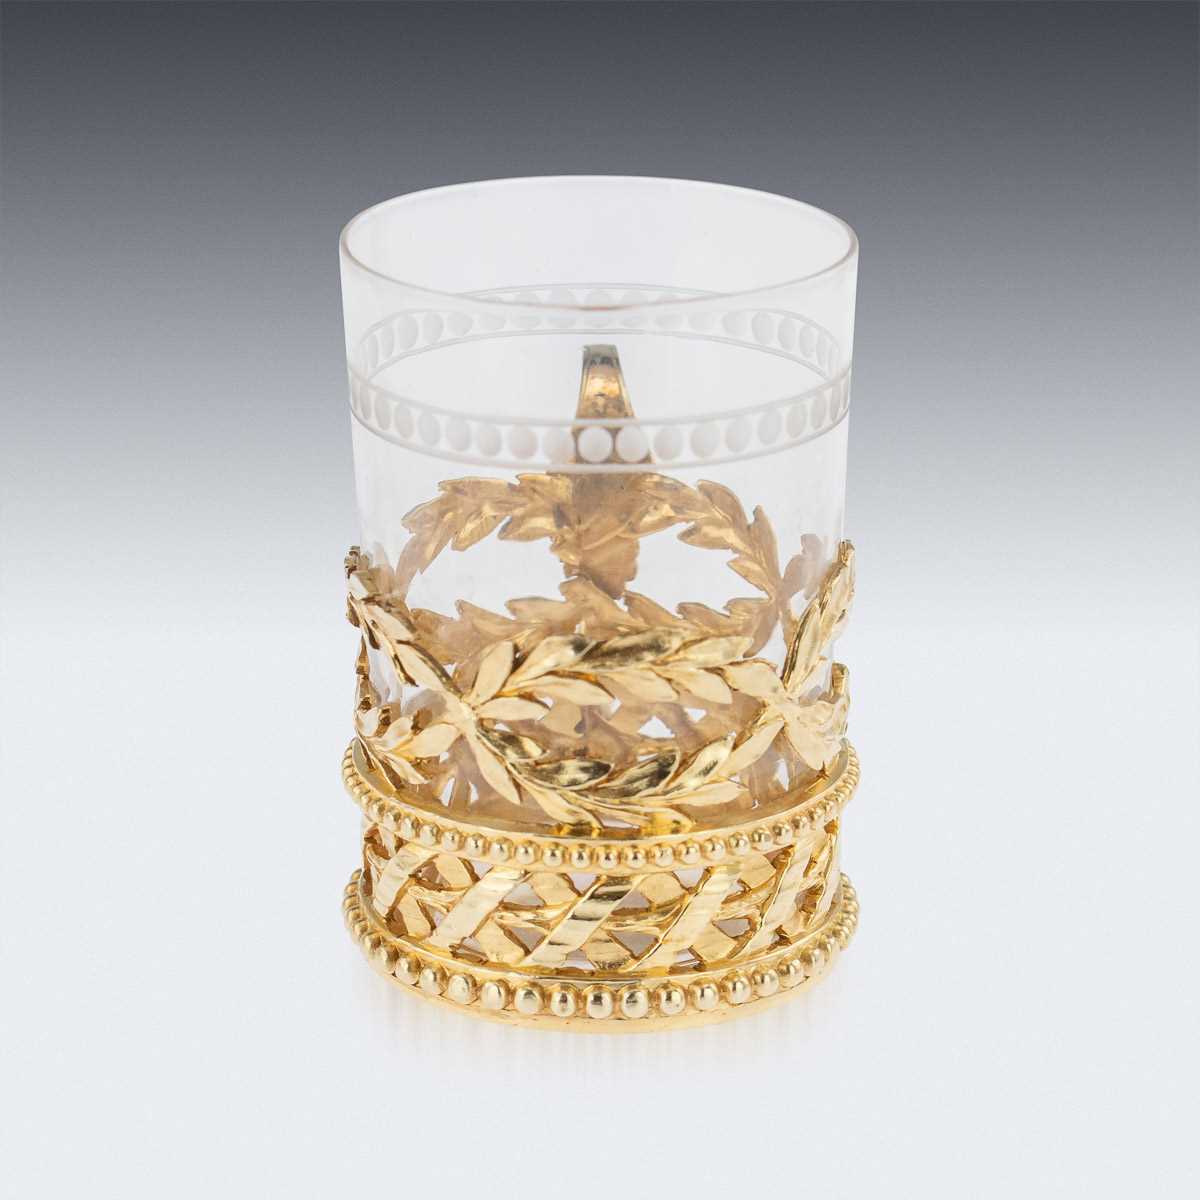 MAISON ODIOT: A 19TH CENTURY SILVER GILT AND GLASS LIQUEUR SERVICE - Image 29 of 37